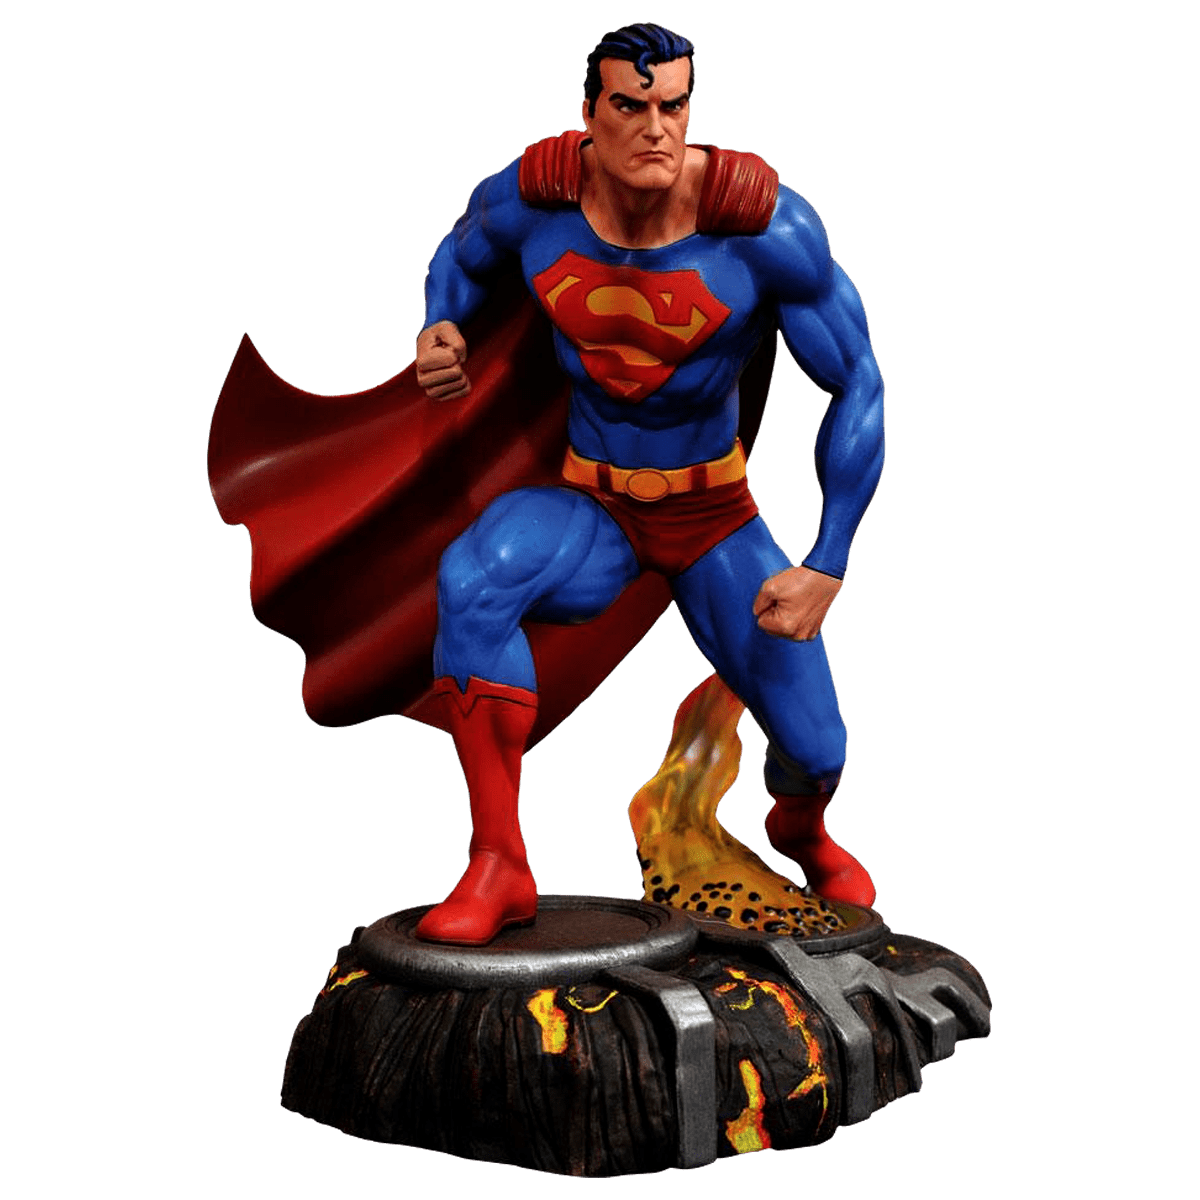 statue-superman-png-free-hd-image-download